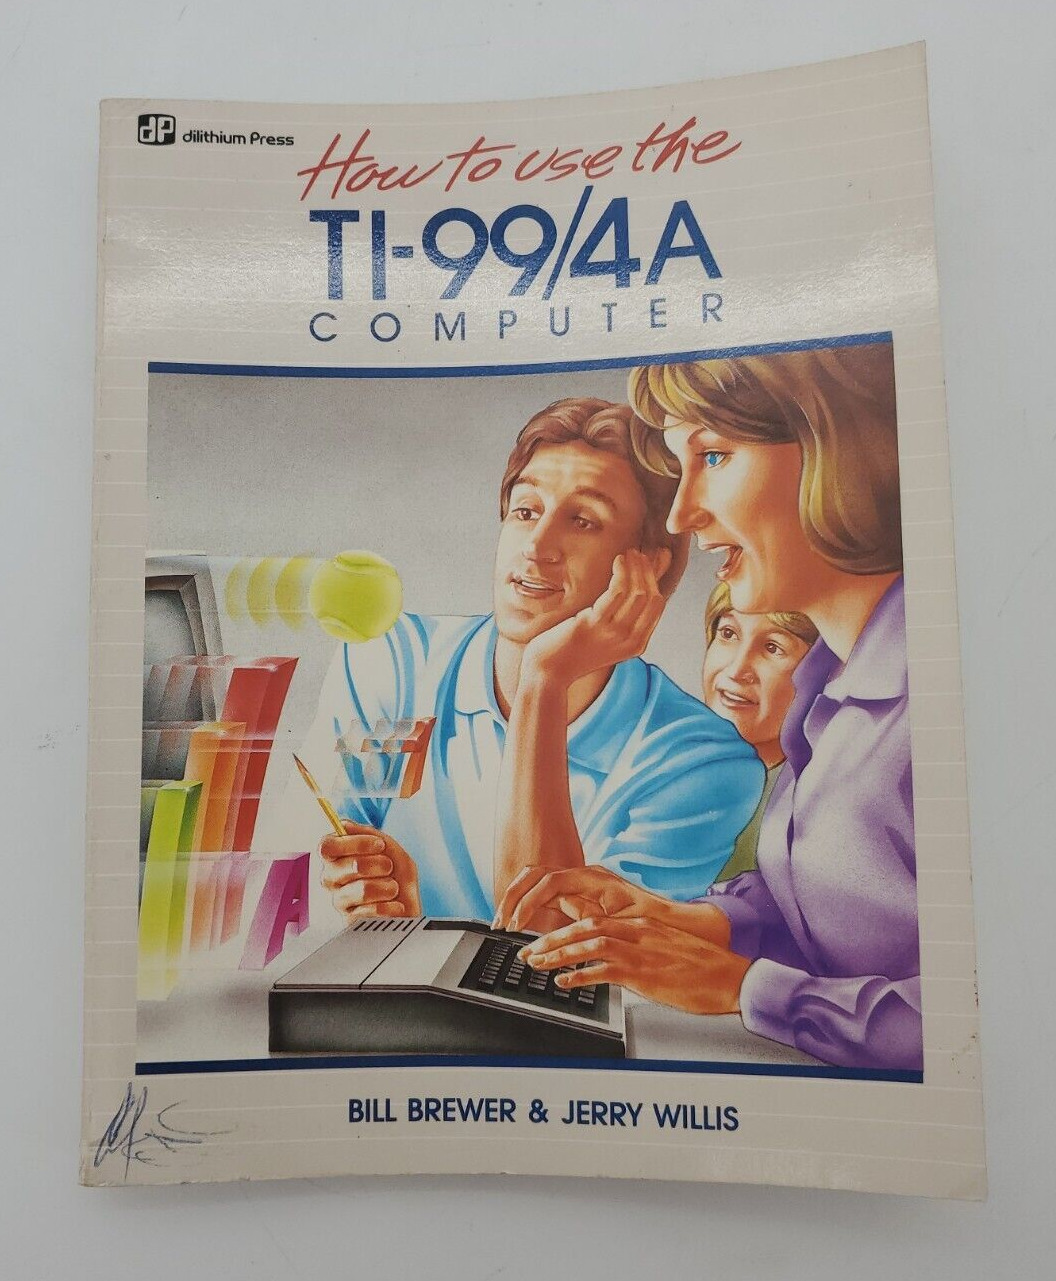 Vintage 1984 How to use the Texas Instruments TI-99 4A Computer Brewer & Willis